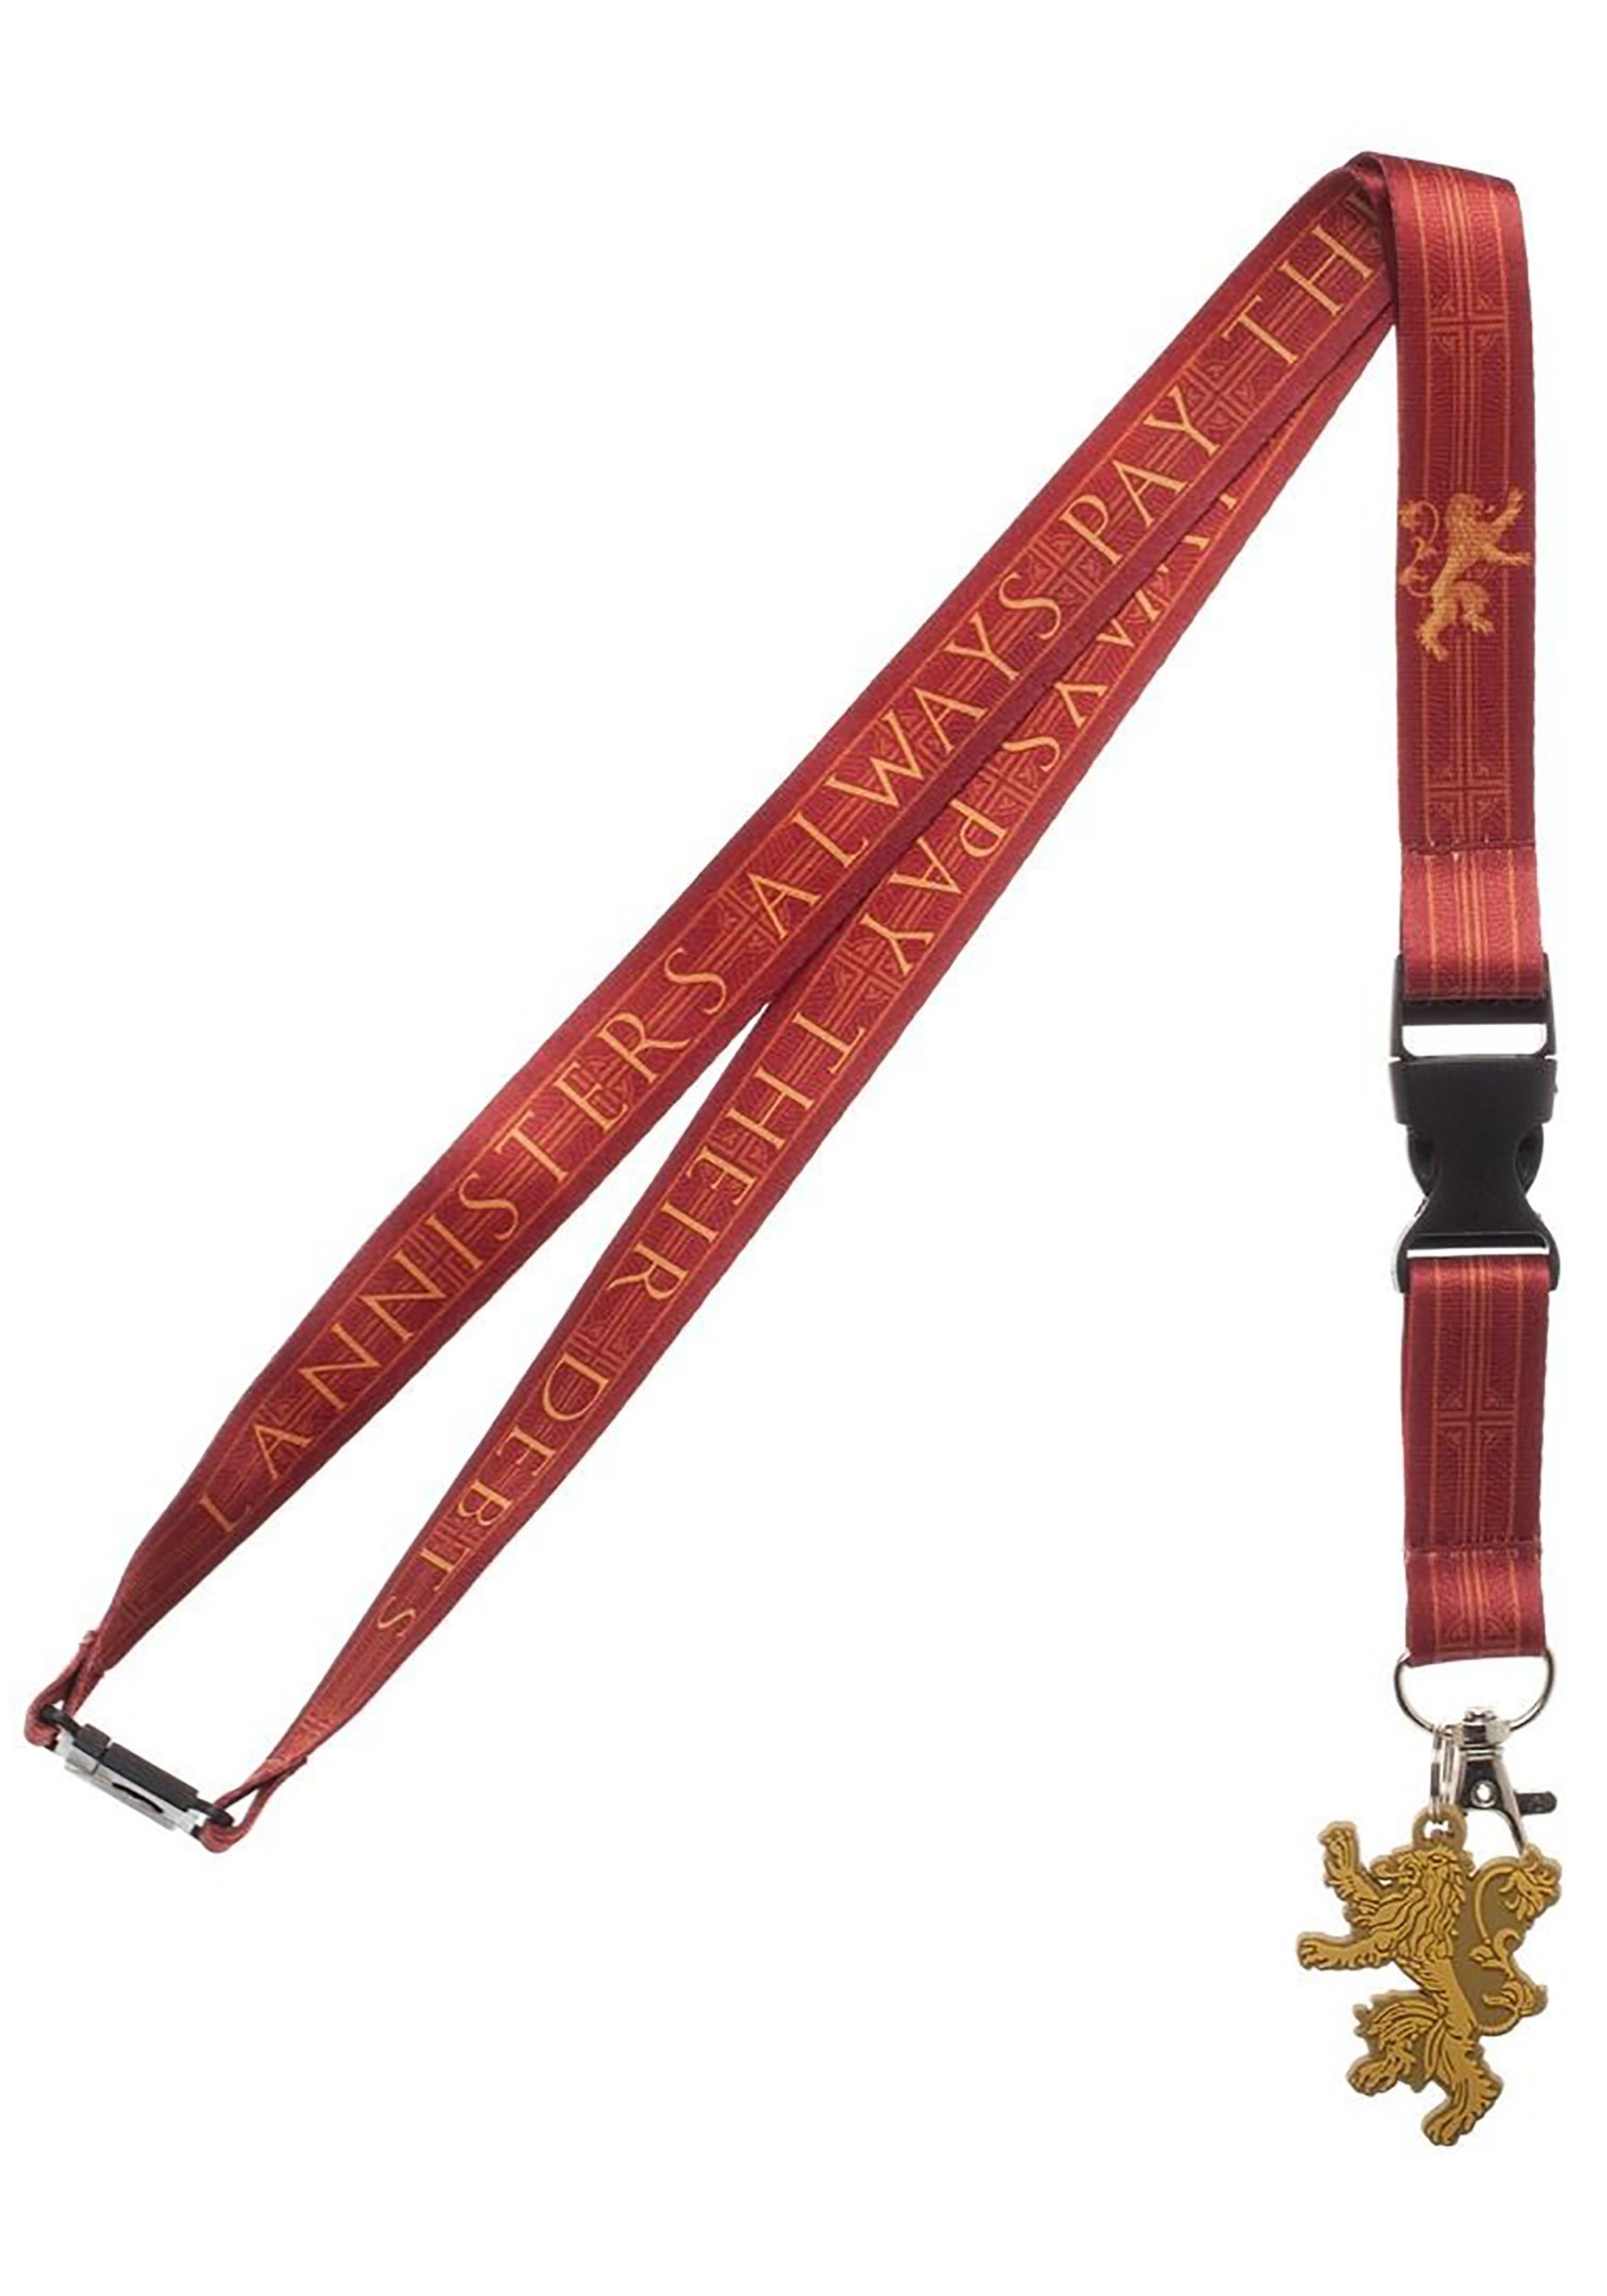 House Lannister Game of Thrones Lanyard